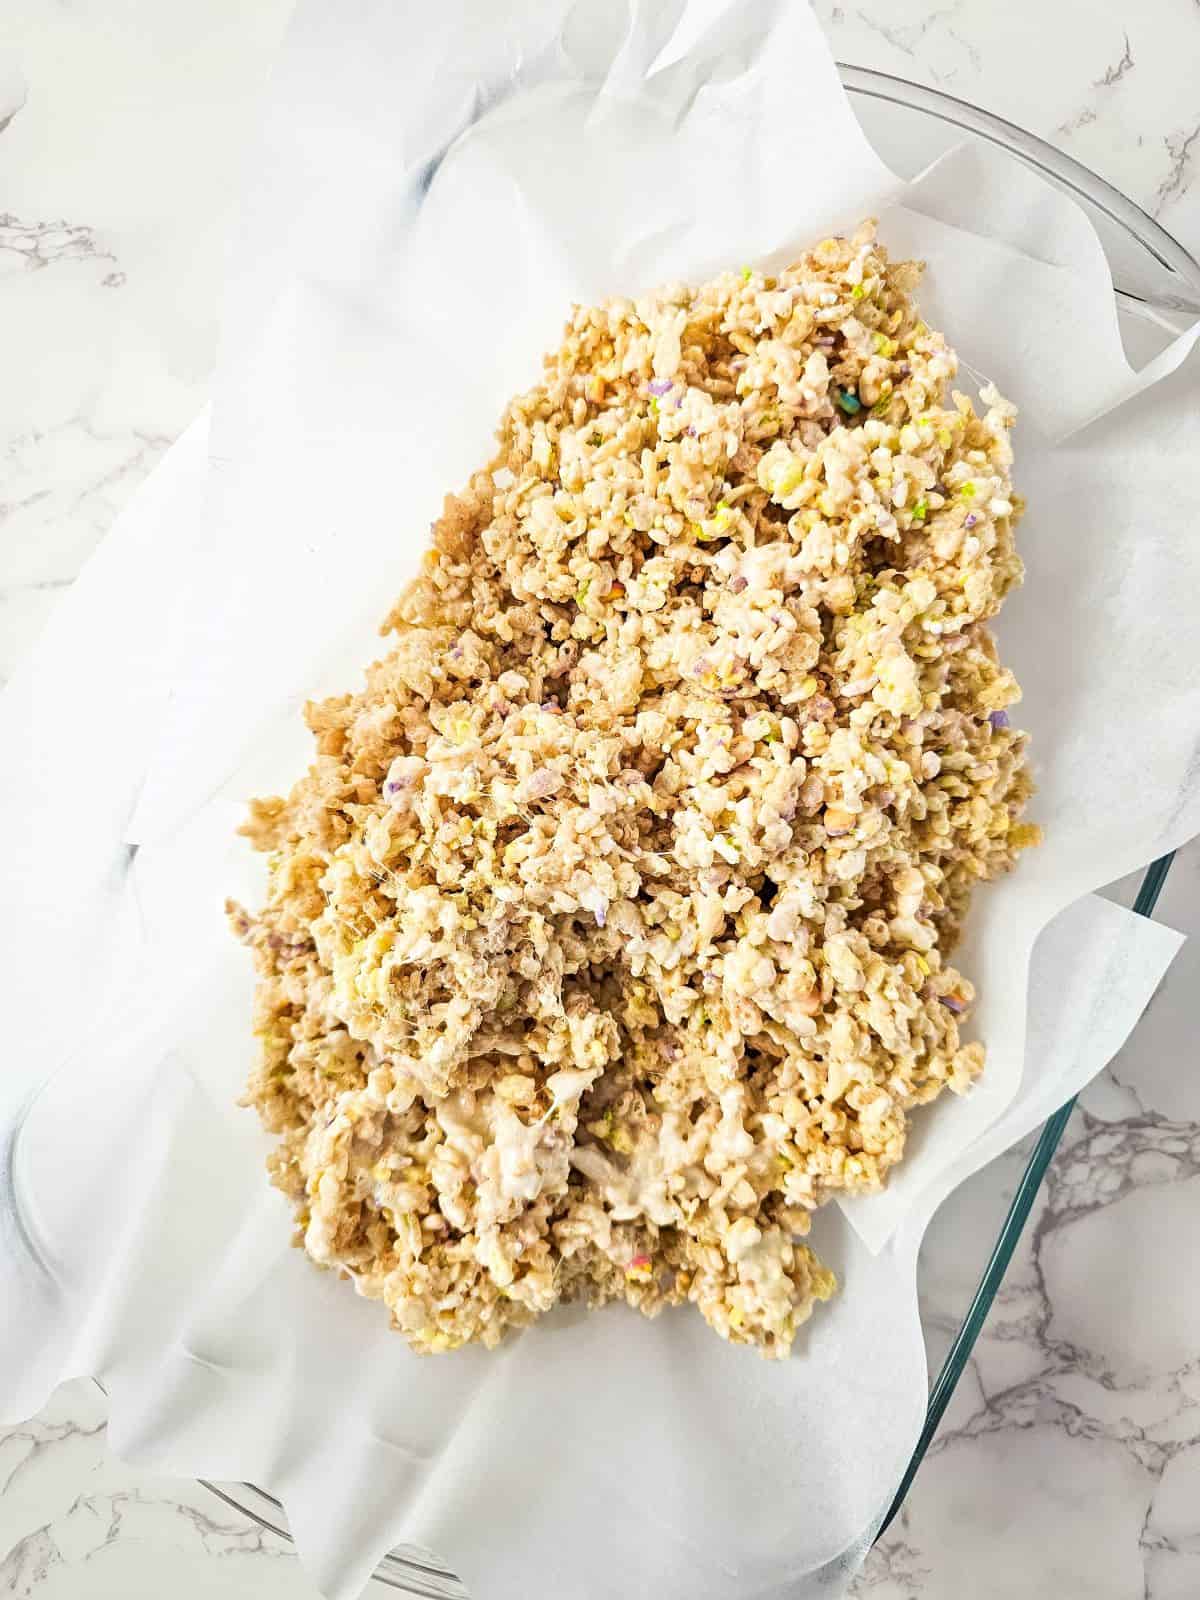 Rice crispy cereal mixture on a pan with a baking sheet.